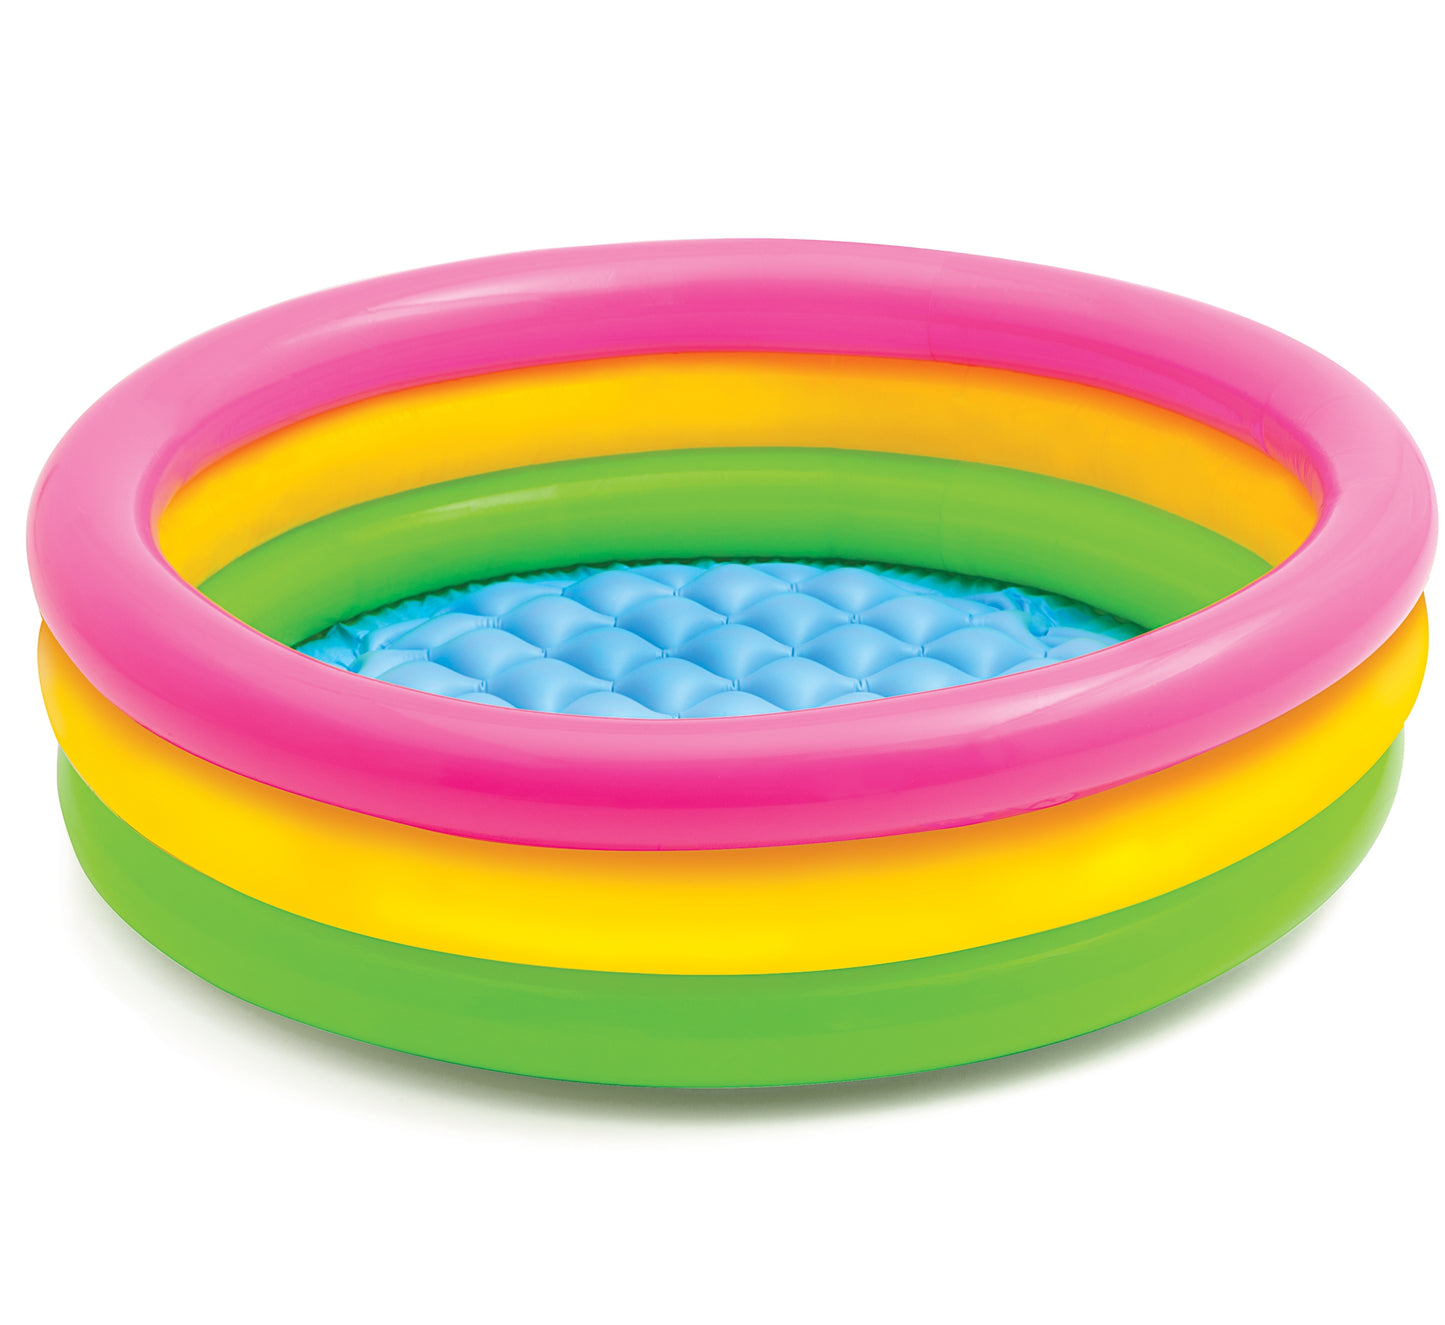 Intex 58924 86cm x 25cm Sunset Glow Inflatable Round Pool for kids ages 2yrs and above